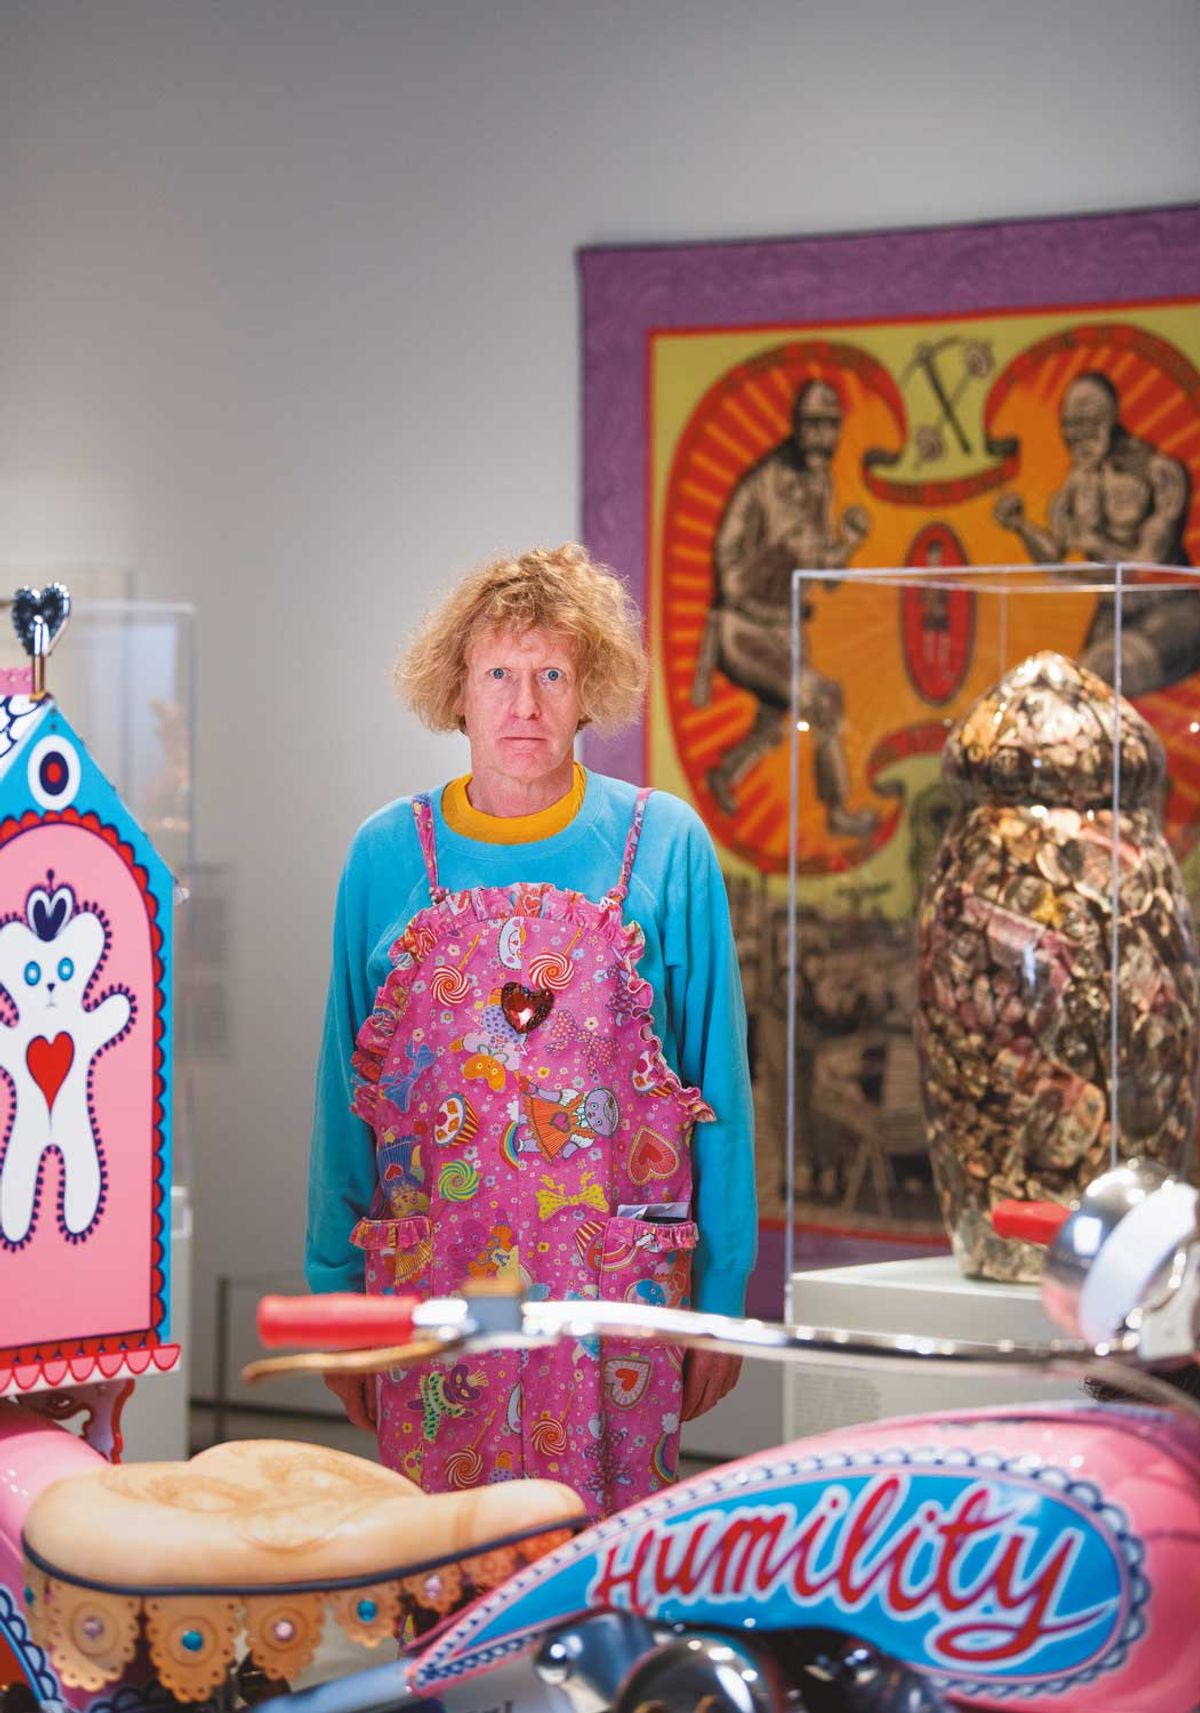 “I will always taunt that idea of exclusivity”; Grayson Perry’s new show at the Royal Scottish Academy will be his first major UK retrospective

Photo: Annar Bjorgli; courtesy National Museum of Norway



